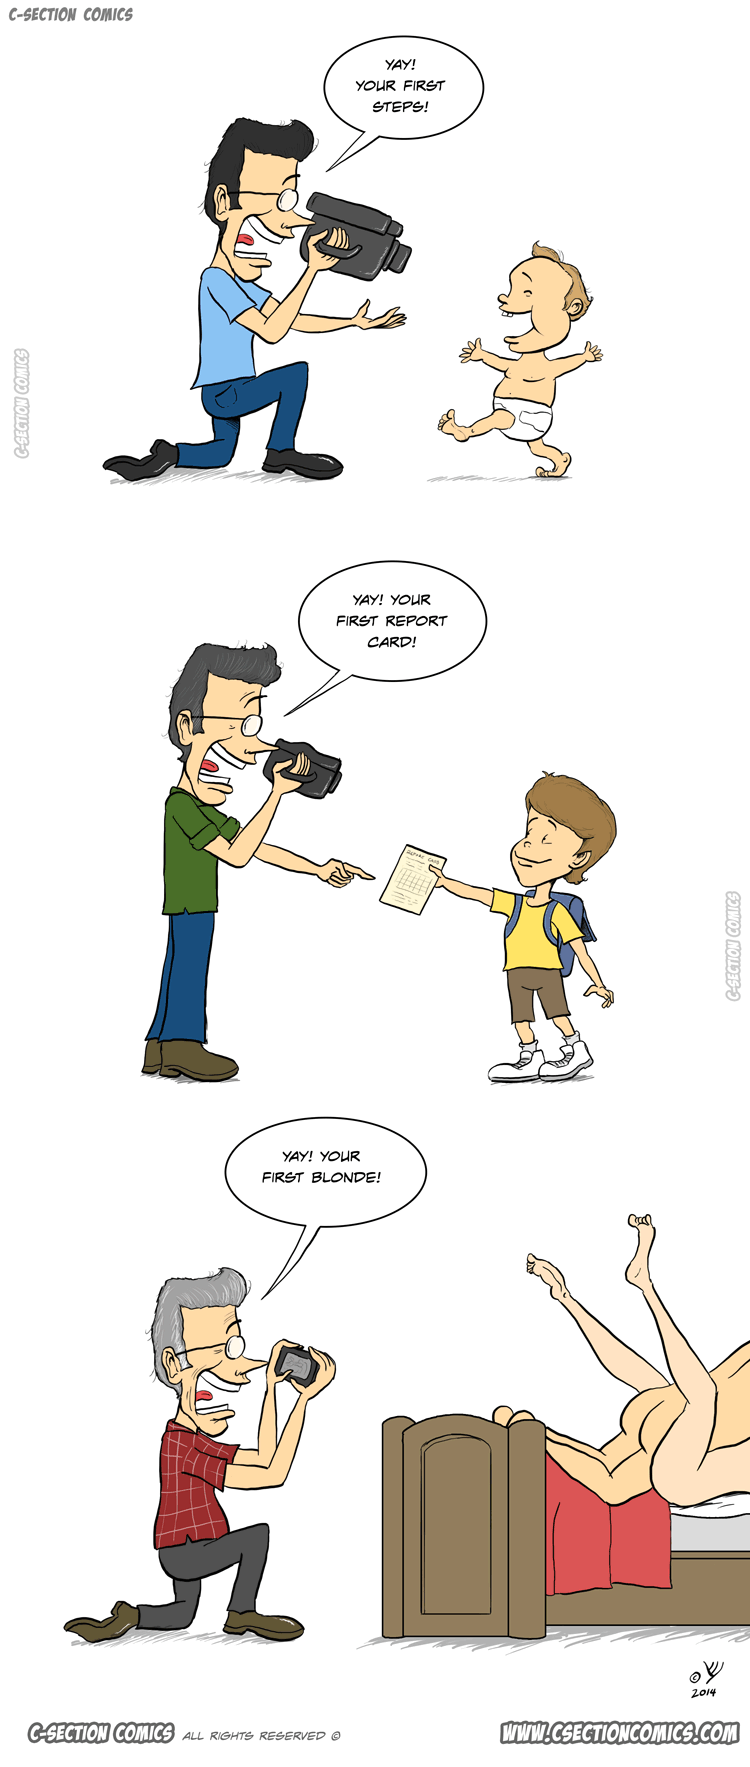 Make Daddy Proud - Cartoon by C-Section Comics